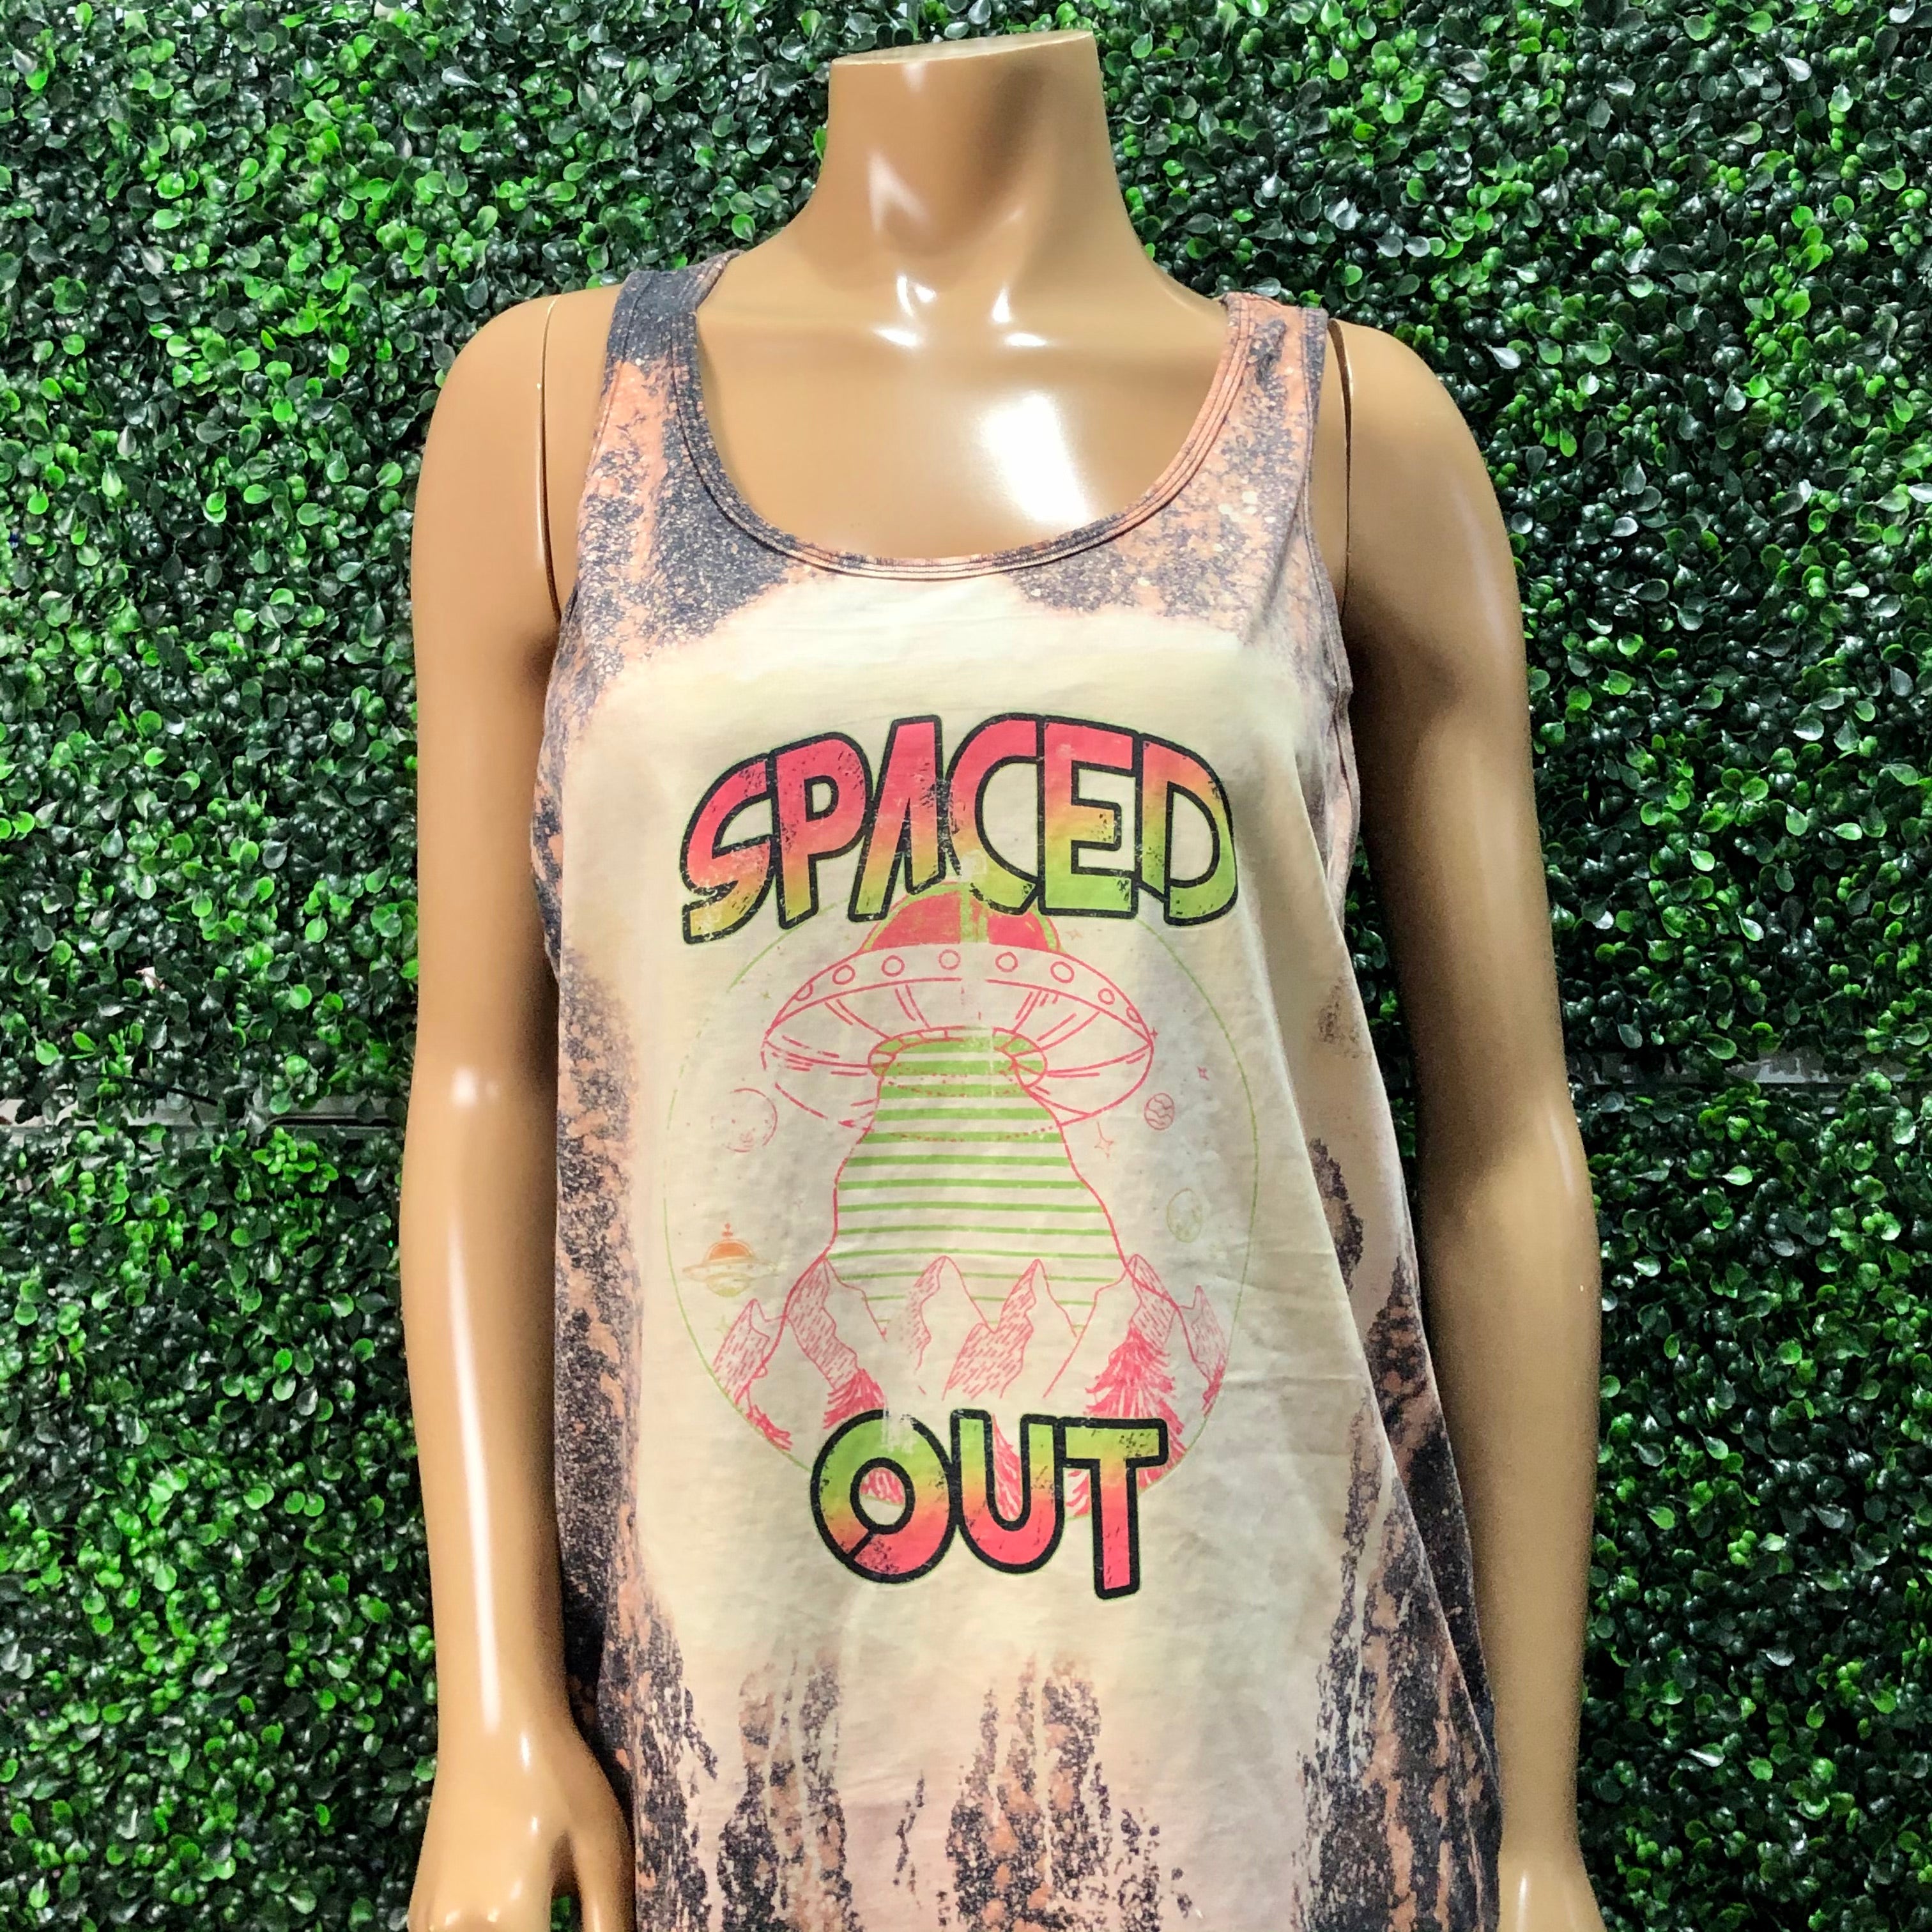 Spaced Out Top Design